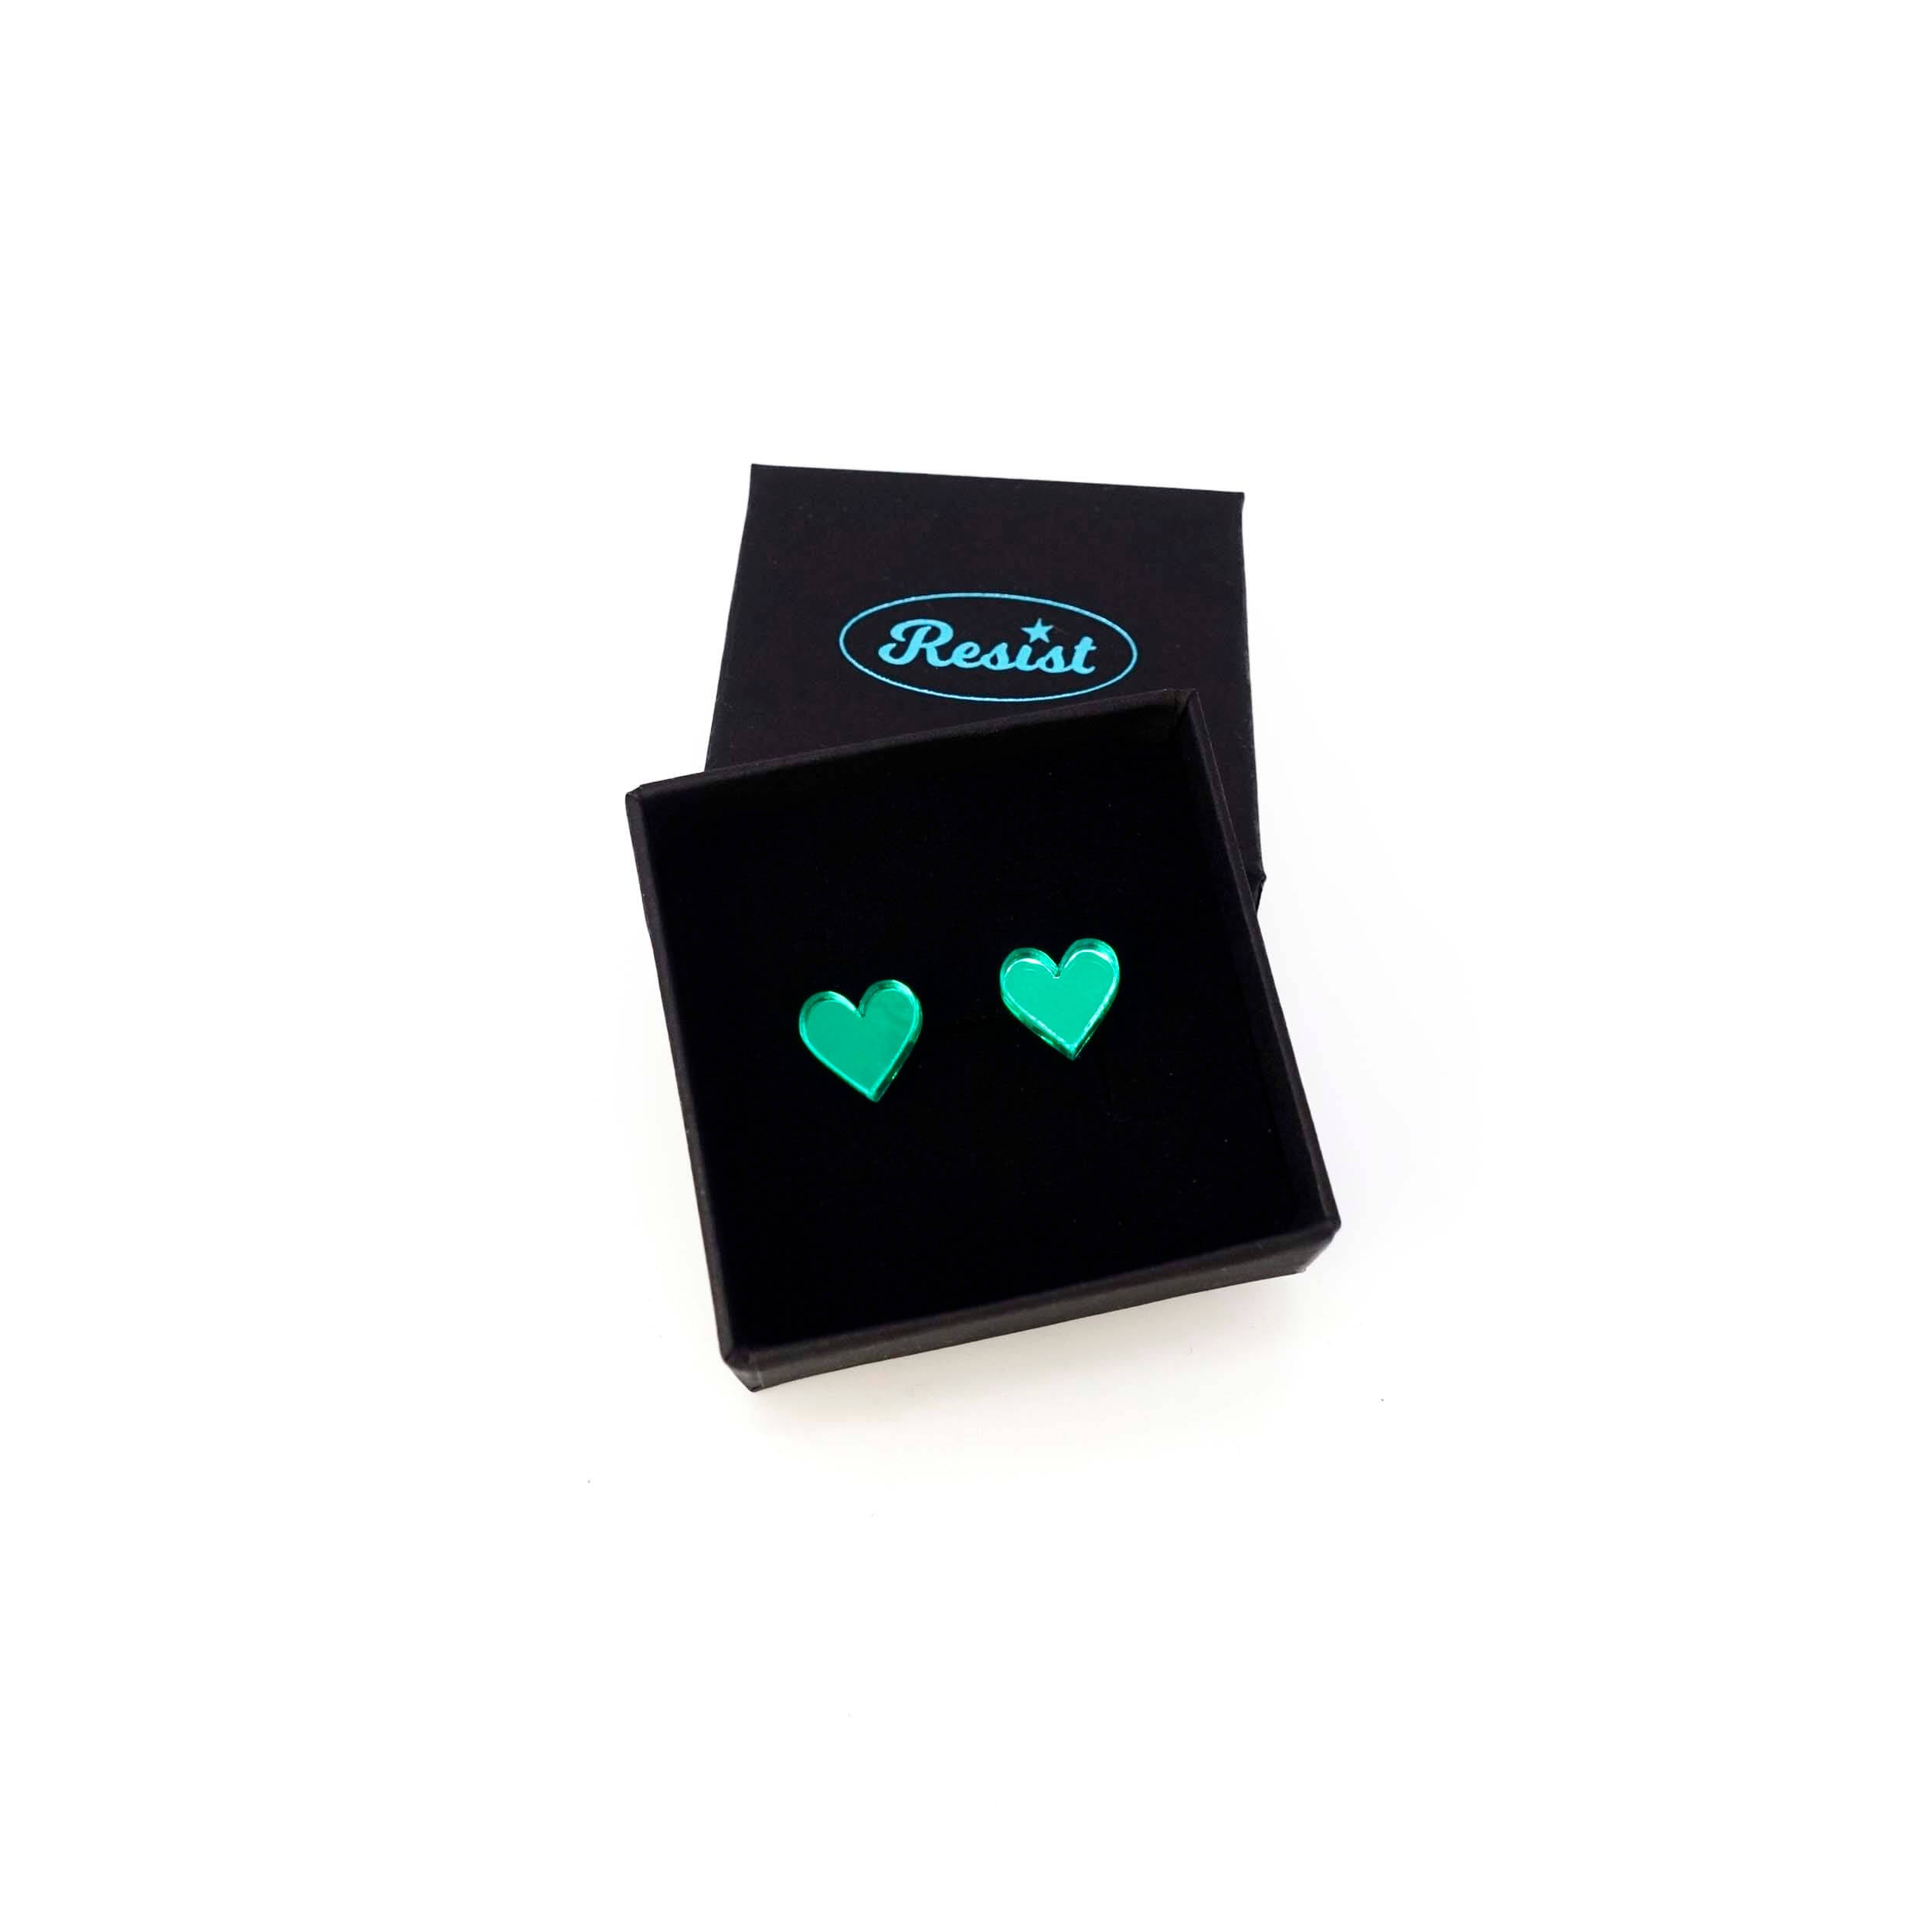 Electric green mirror tiny heart stud earrings shown in a Wear and Resist gift box. 